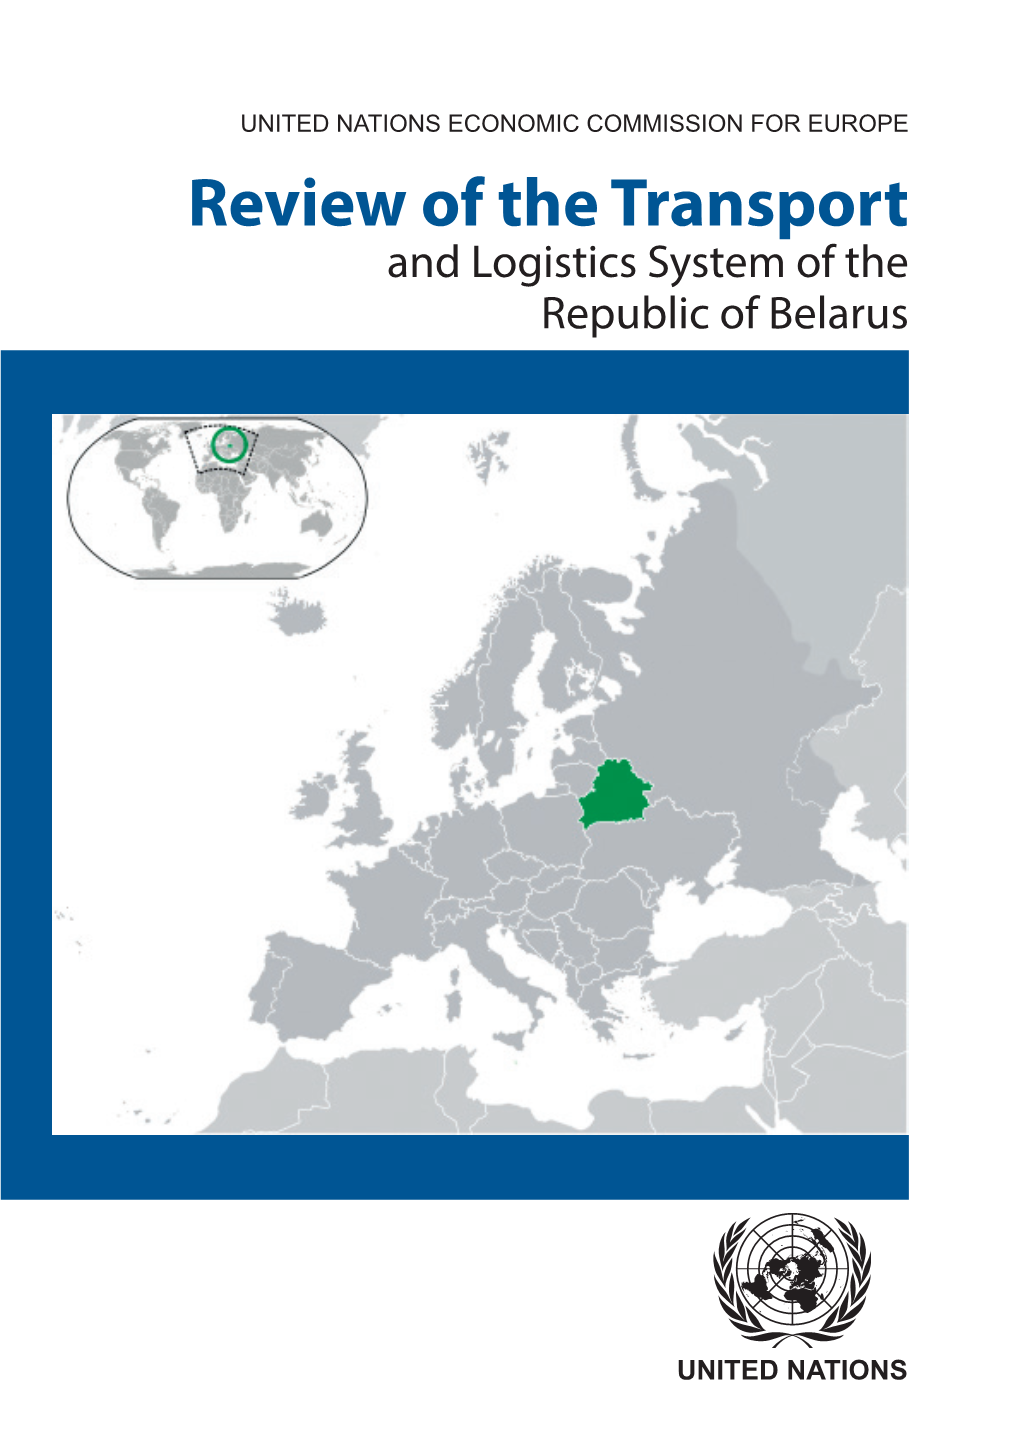 Review of the Transport and Logistics System of the Republic of Belarus